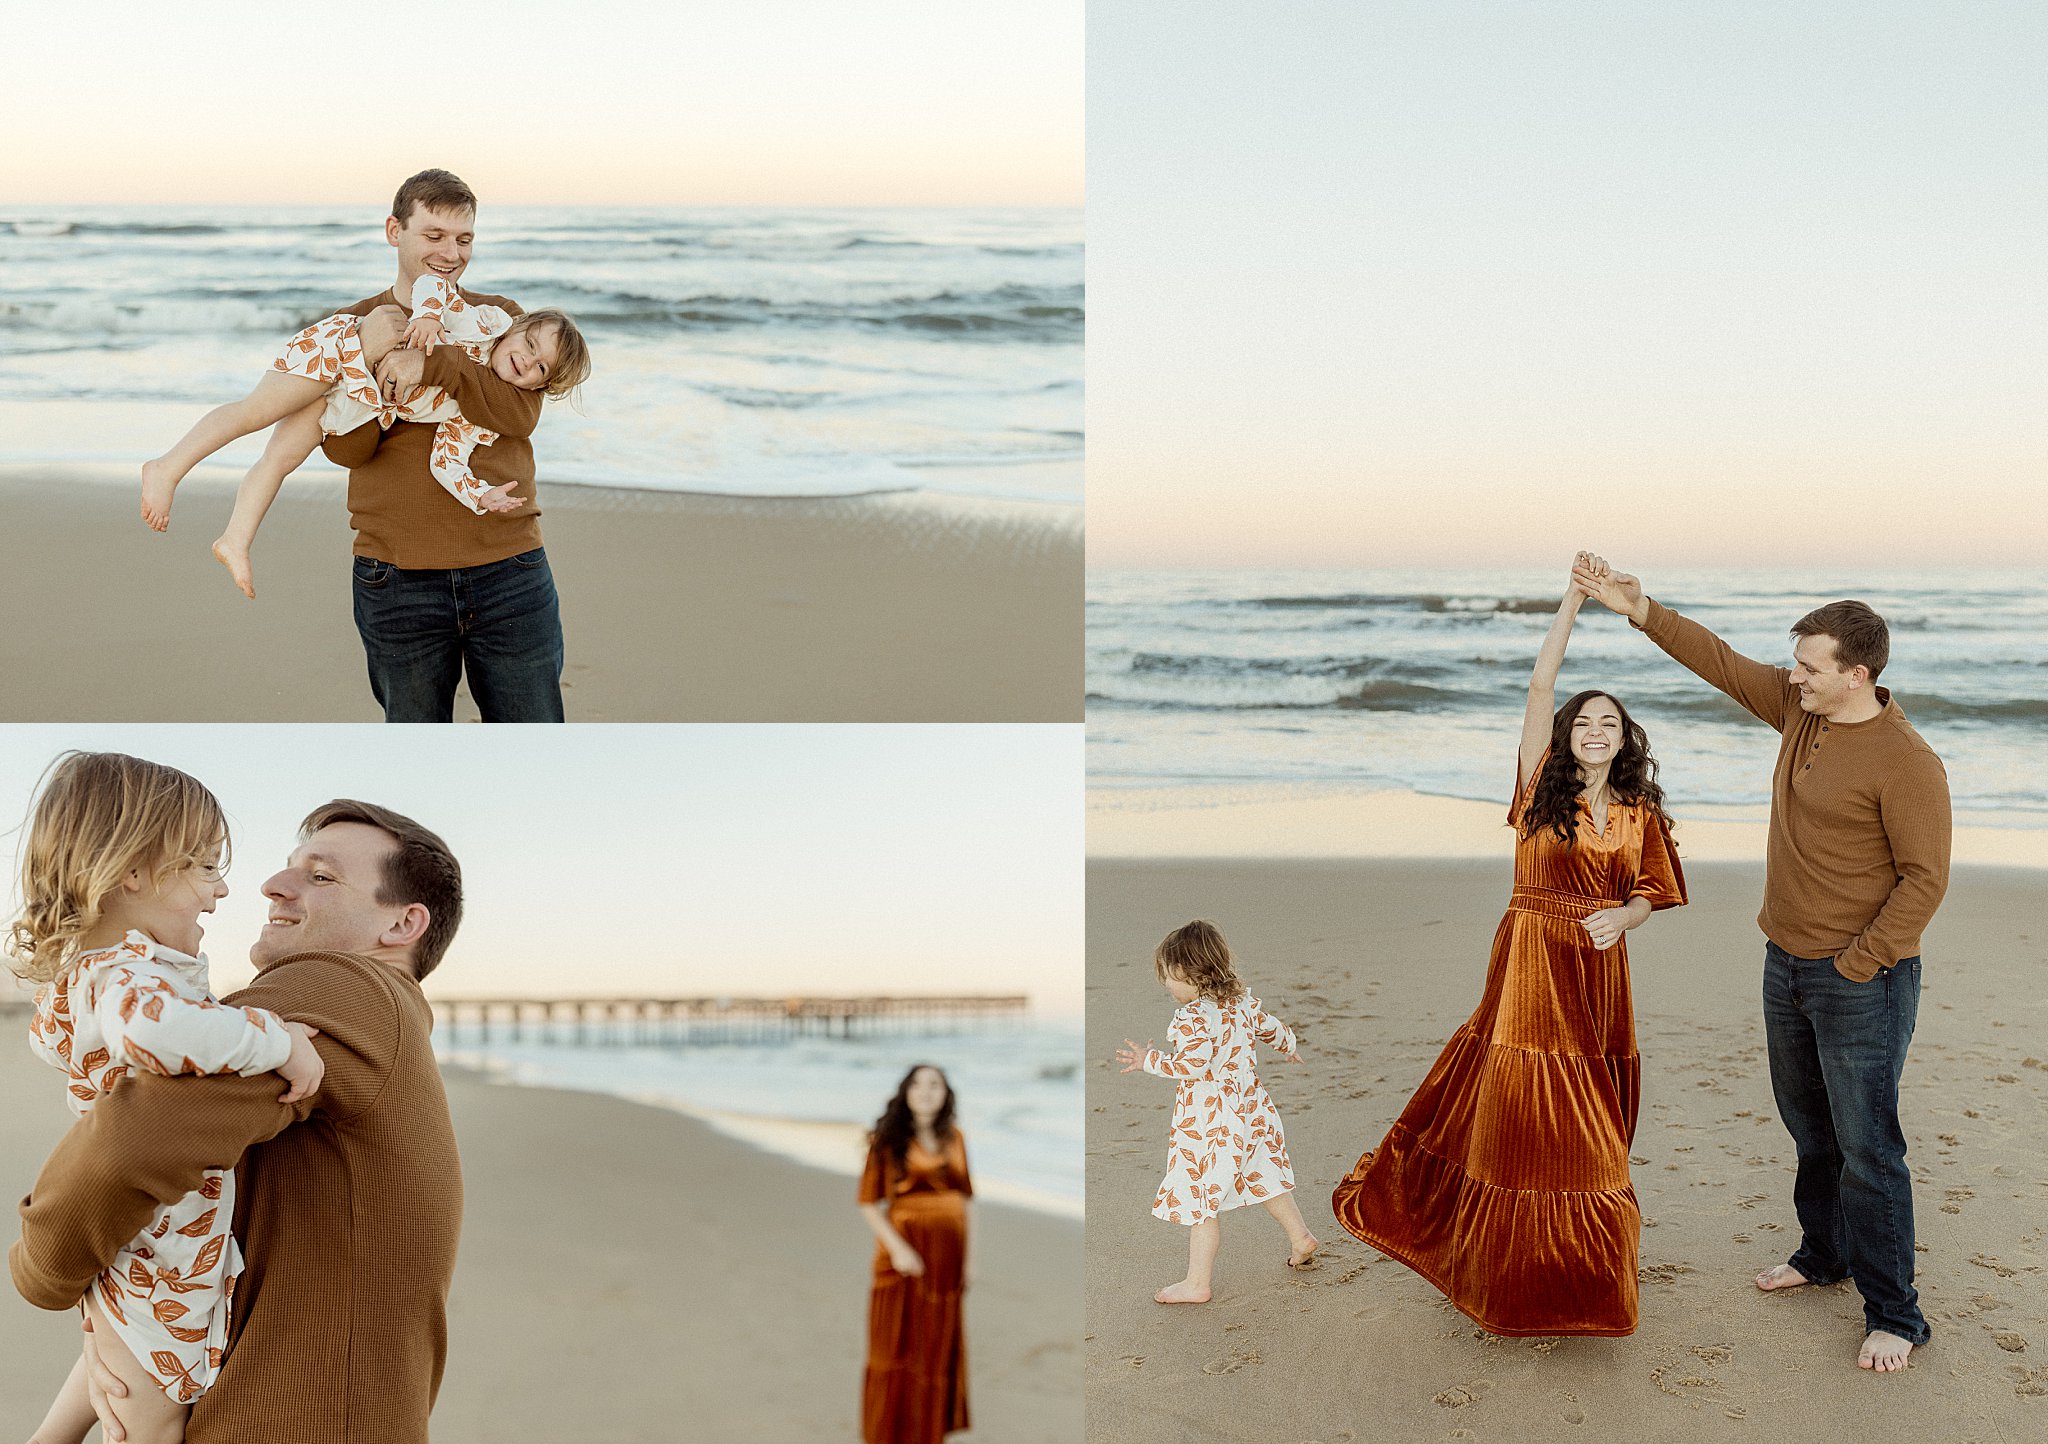 parents dance together on sand as child plays by Nikki Meer Photography